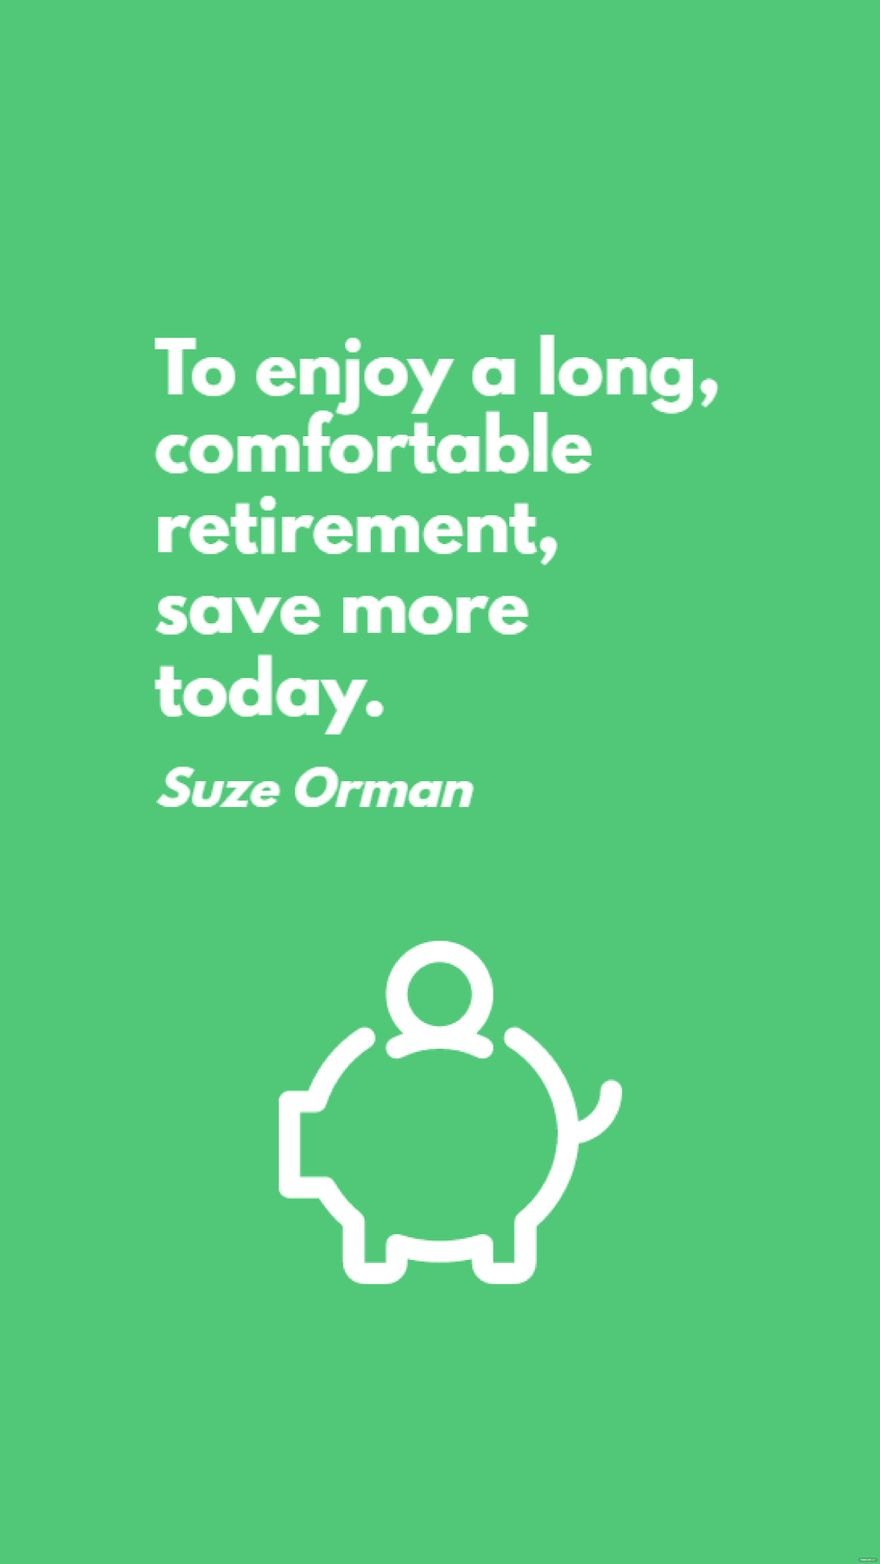 Suze Orman - To enjoy a long, comfortable retirement, save more today. in JPG